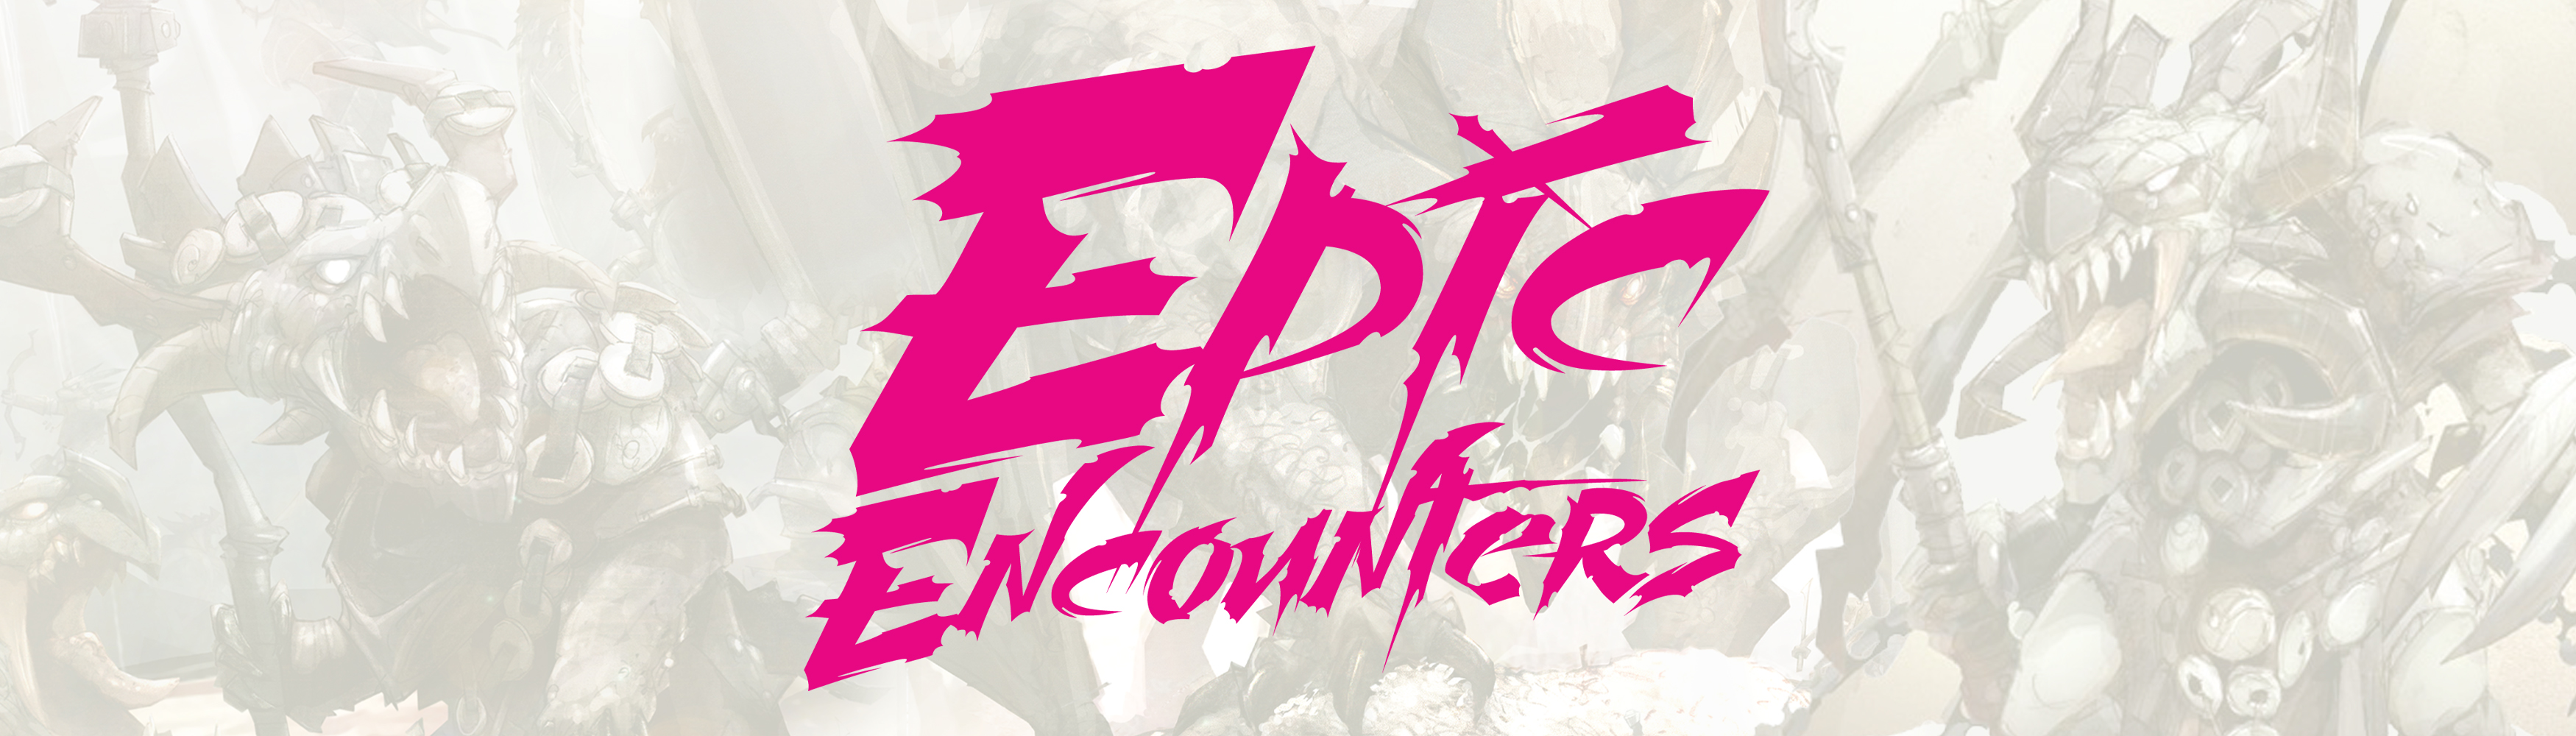 Epic Encounters banner main